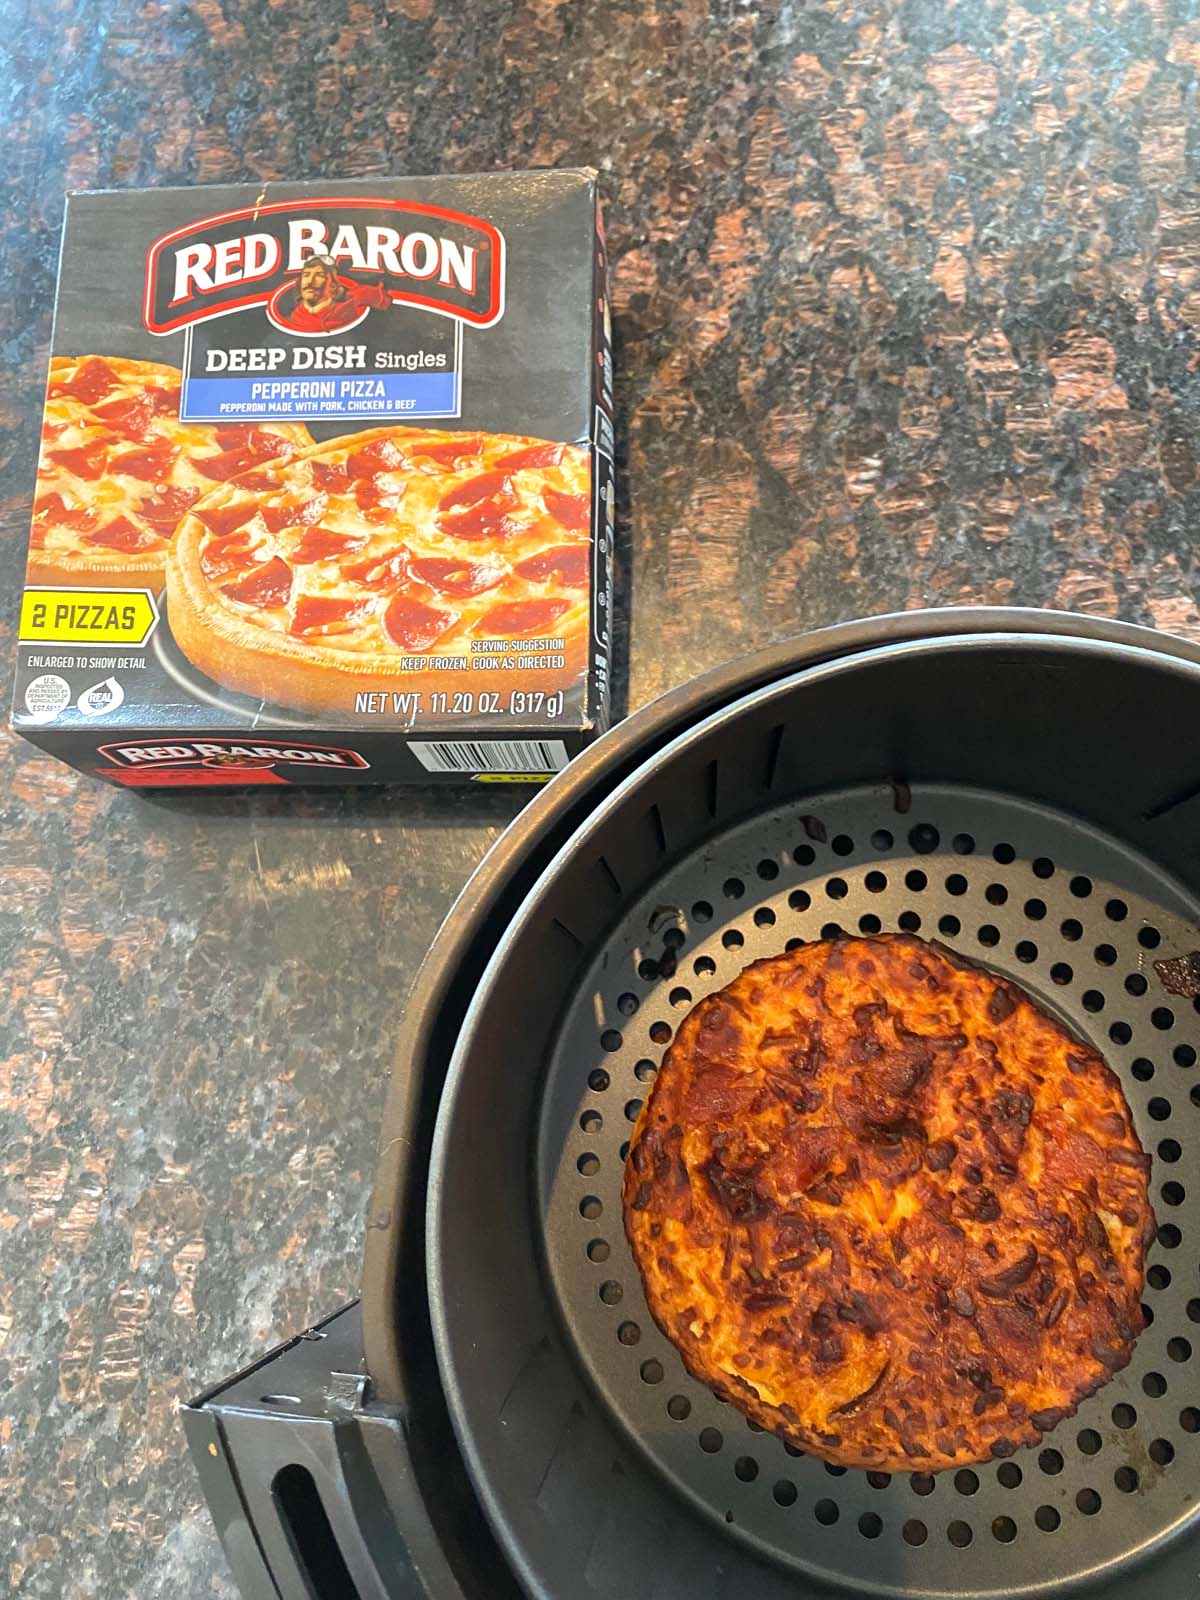 Box of red baron frozen pizza next to air fryer basket with cooked pizza inside.